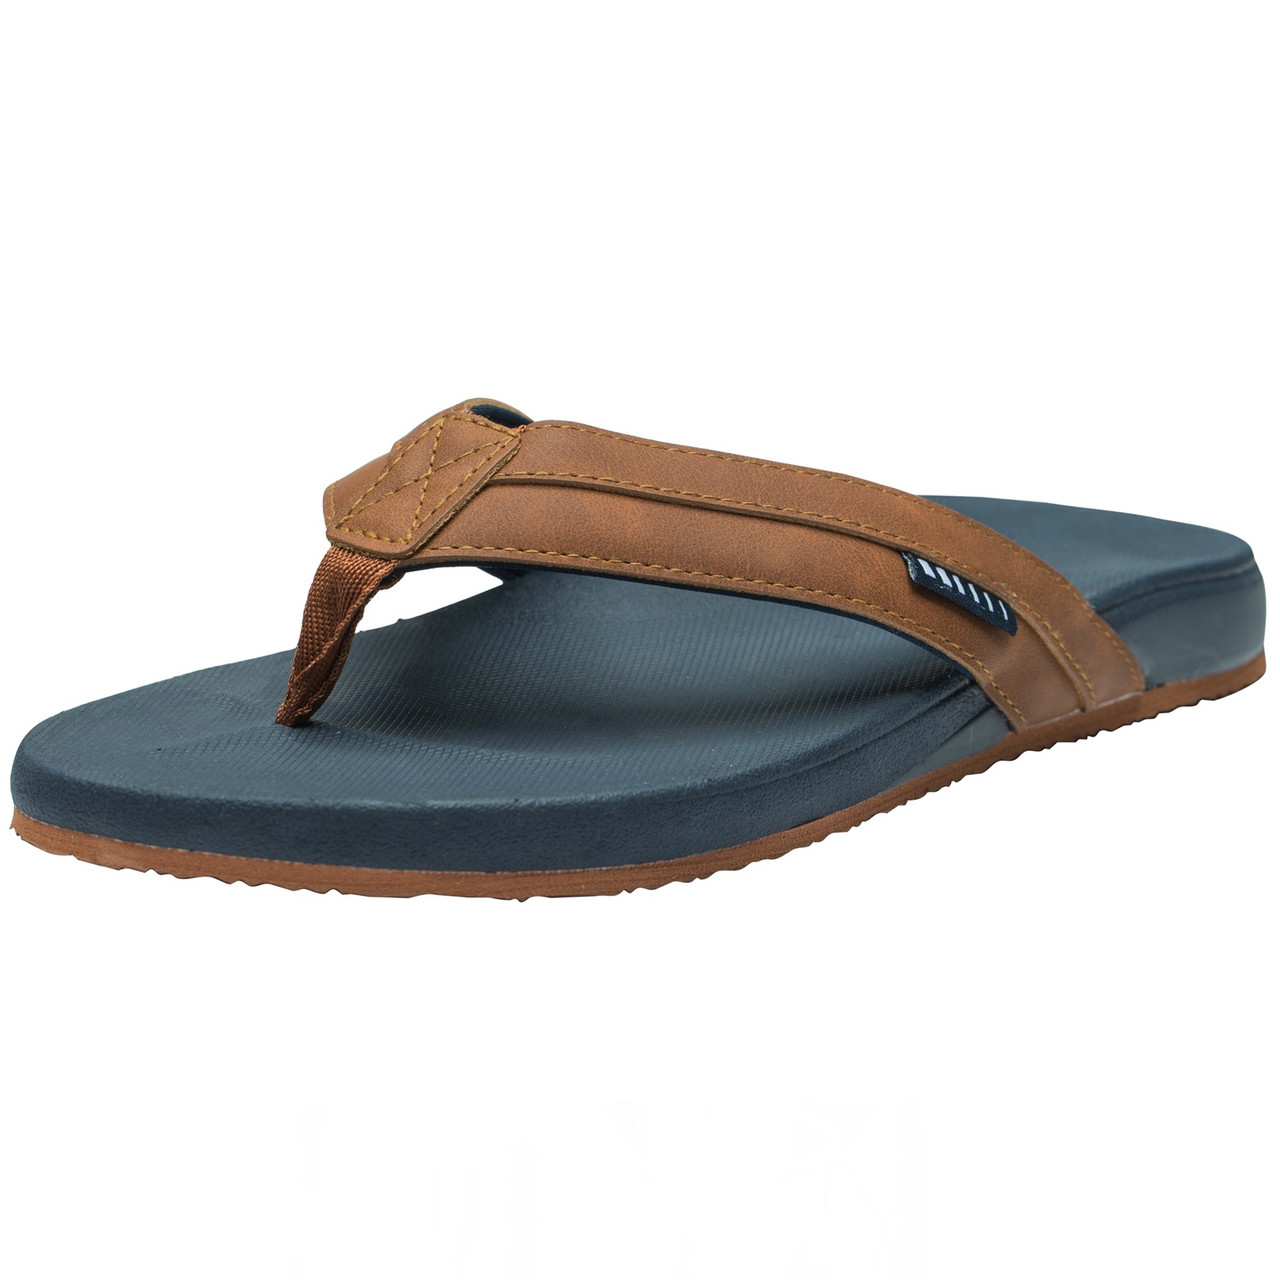 Wholesale Beach fashion men's slippers casual leather summer flip-flops  men's shoes From m.